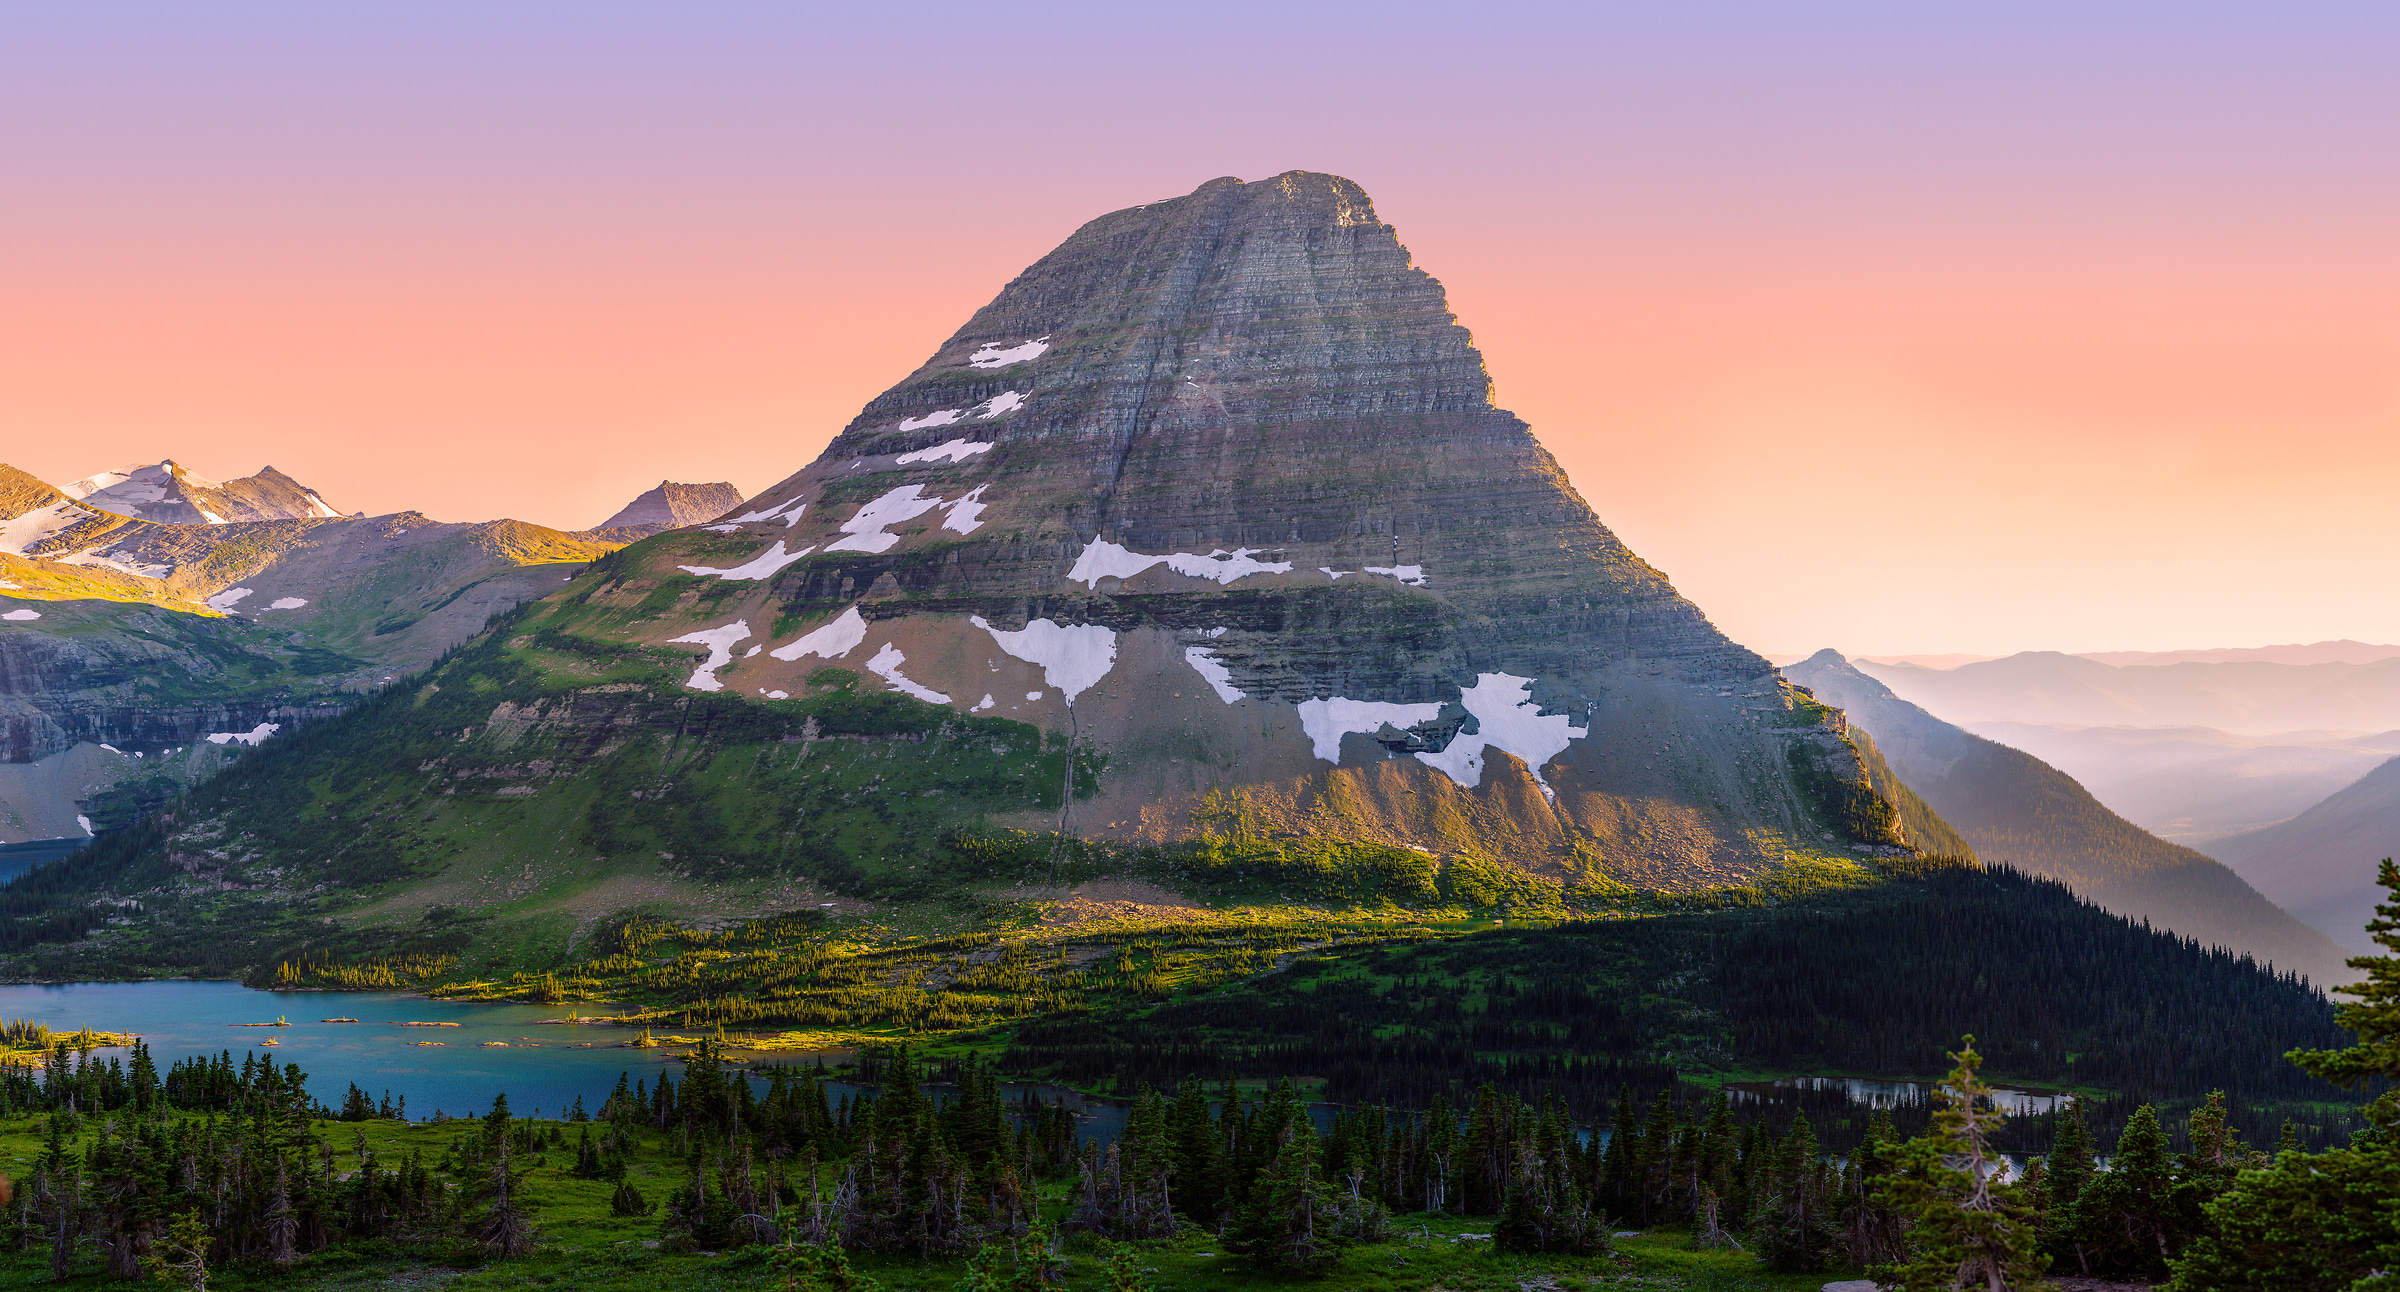 895 megapixels! A very high resolution, large-format VAST photo print of a sunset and mountain; landscape photograph created by Chris Blake in Hidden Lake, Glacier National Park.